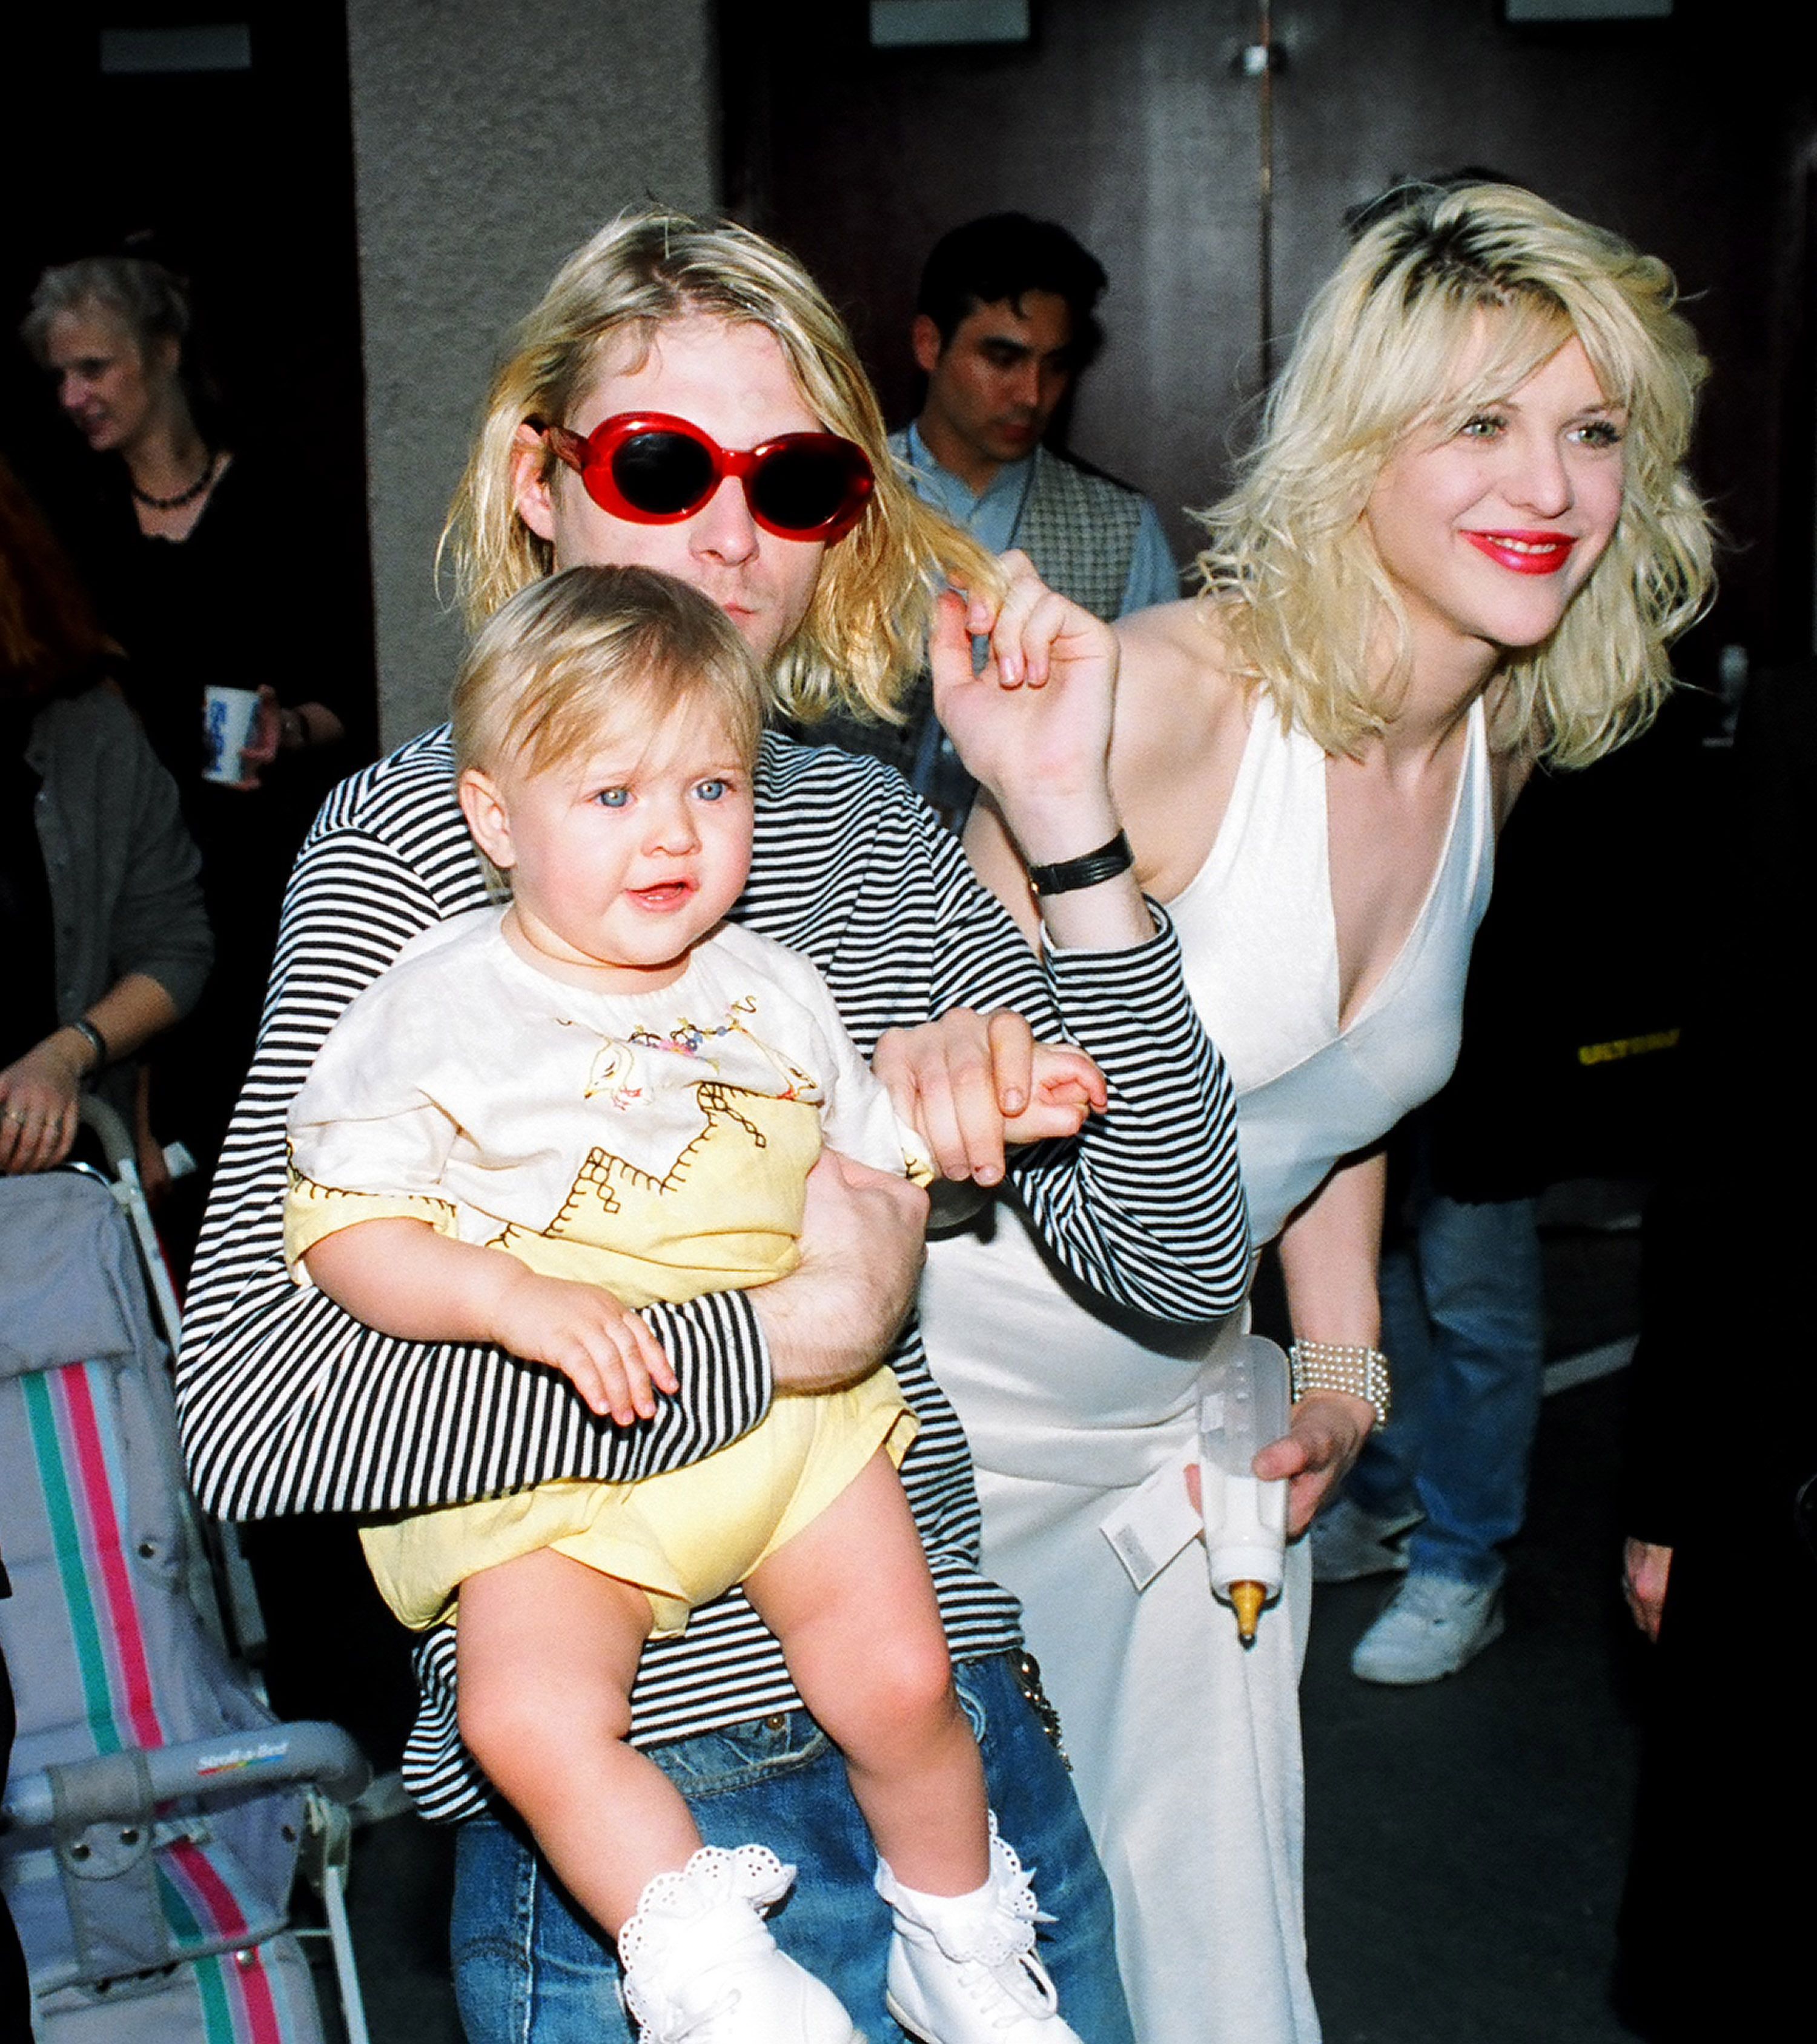 Kurt Cobain of Nirvana, Courtney Love and daughter Frances at the 1993 MTV Video Music Awards | Source: Getty Images